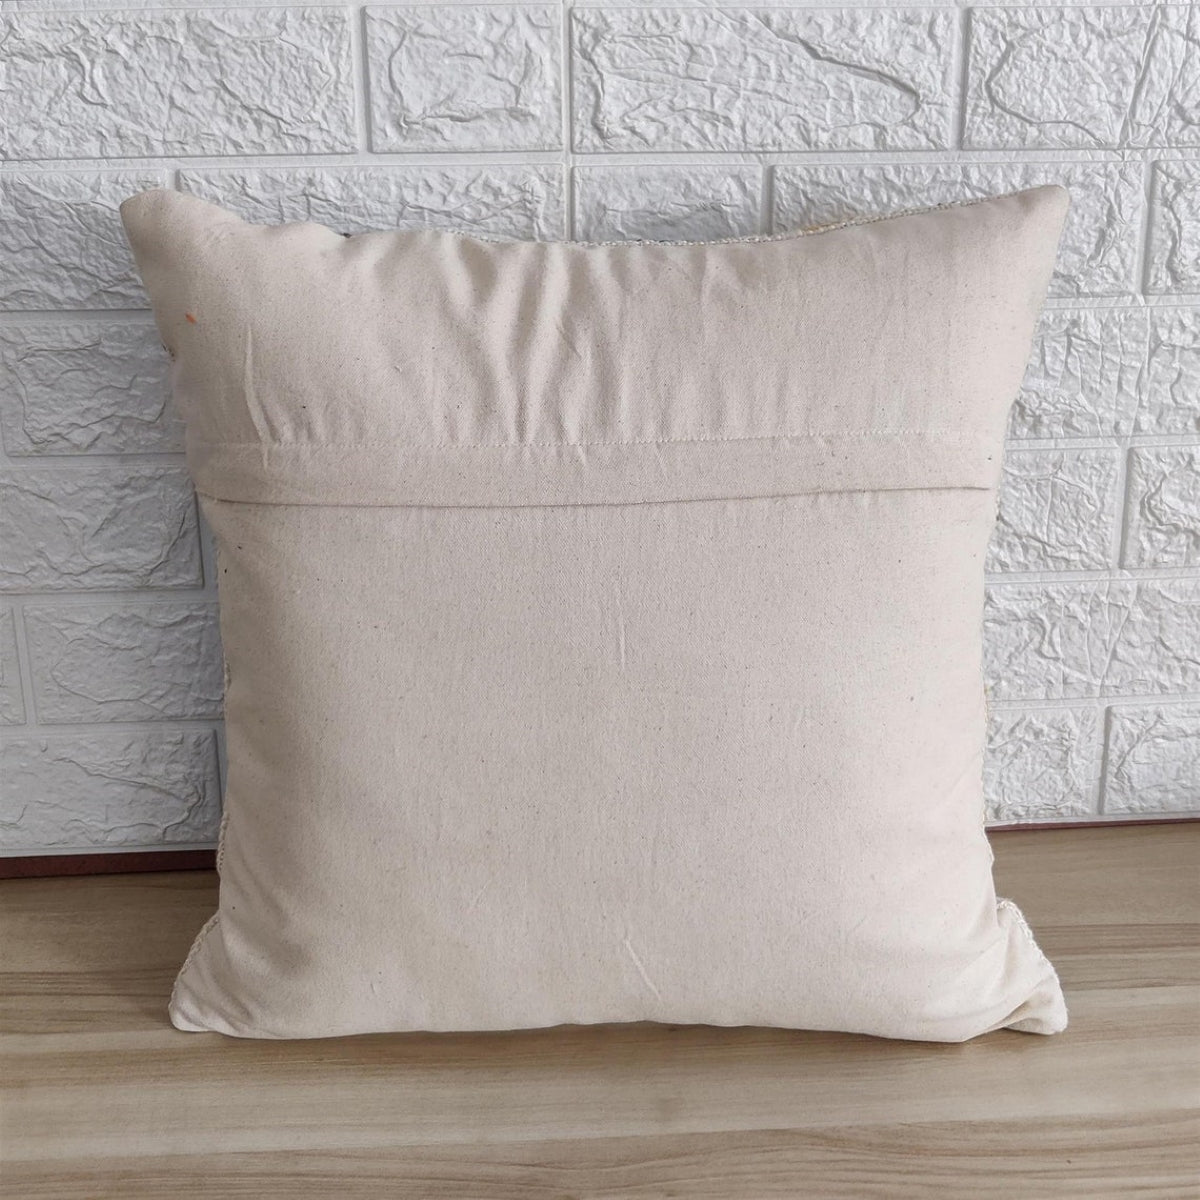 Multicolour Cotton Embroidered Boho Textured Cushion Cover